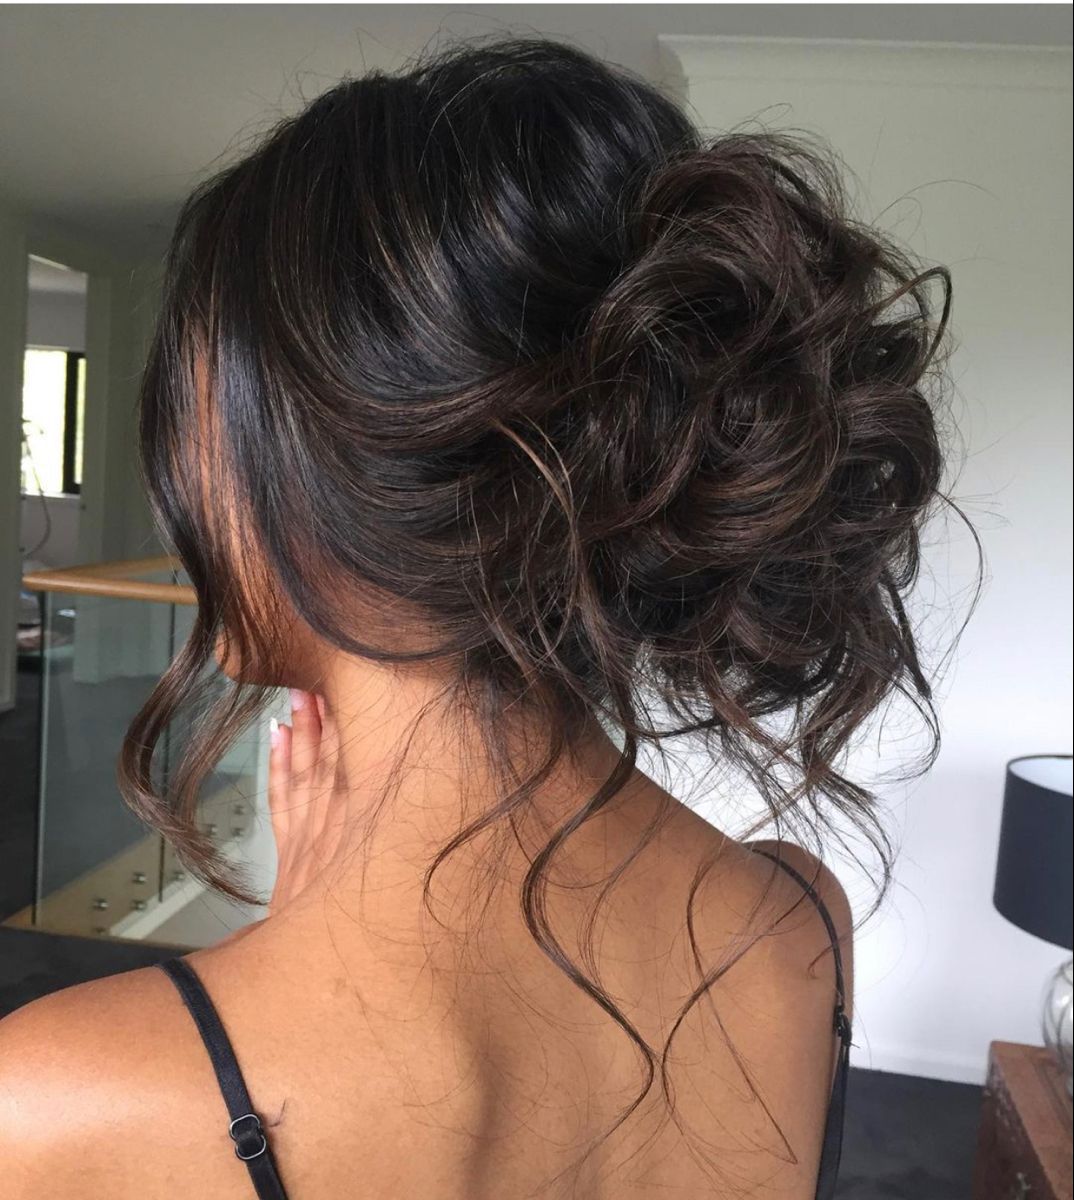 Elegant and Sophisticated: Formal Hairstyles for Long Hair